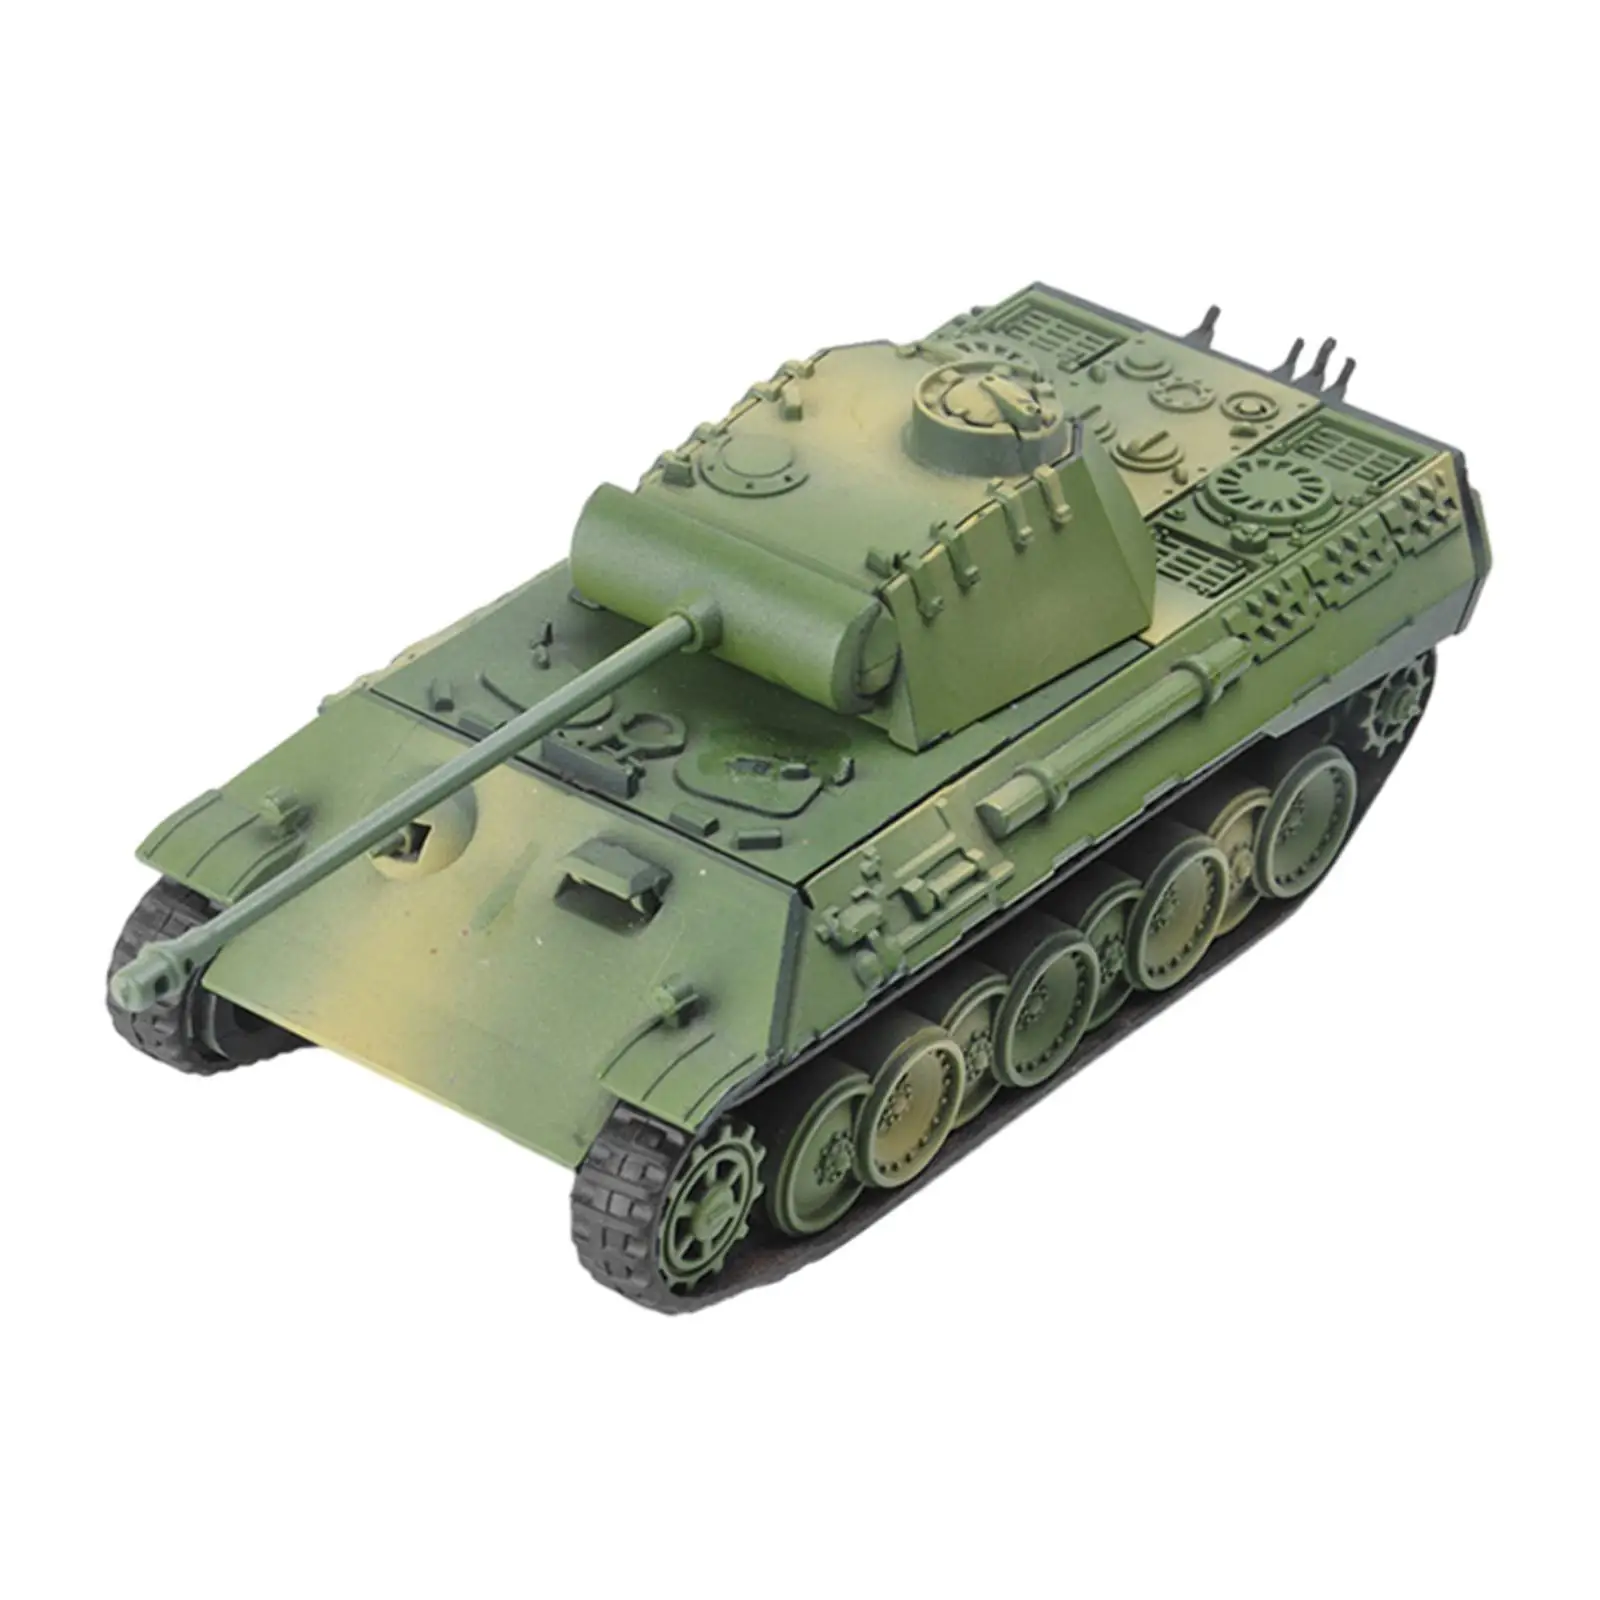 1:72 Scale Tank Model Kits DIY Assemble Party Favors Tabletop Decor Educational Toys Collectible for Girls Kids Adults Boy